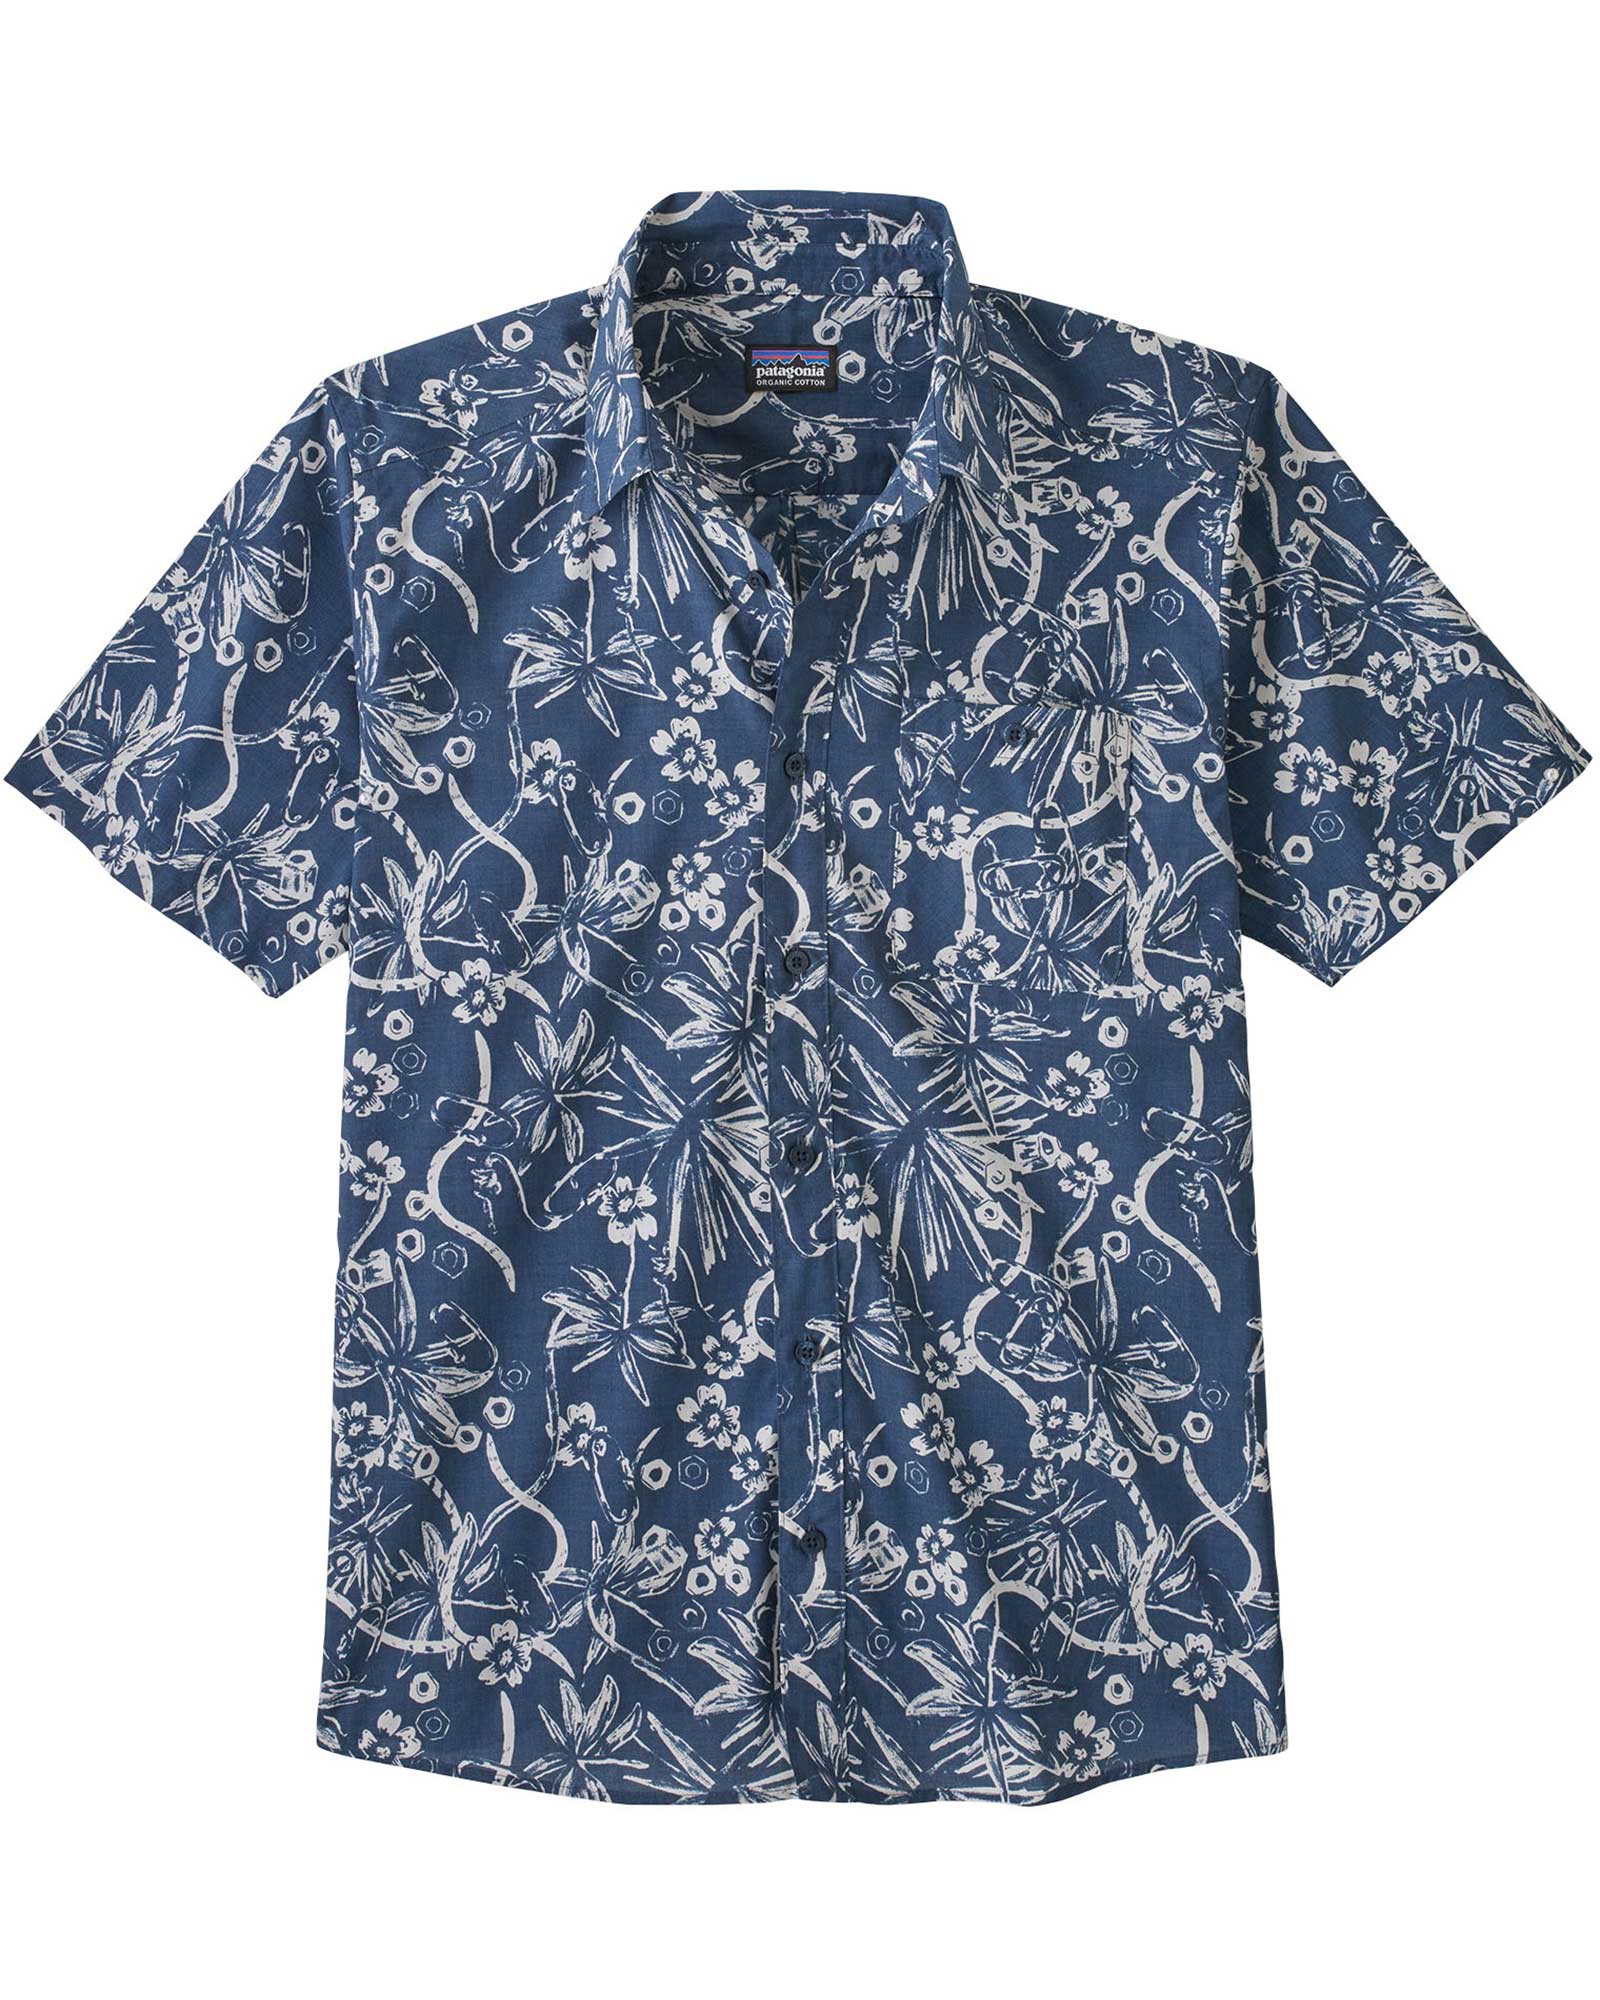 Patagonia Go To Men’s Shirt - Stone Blue/Dirt Bags S